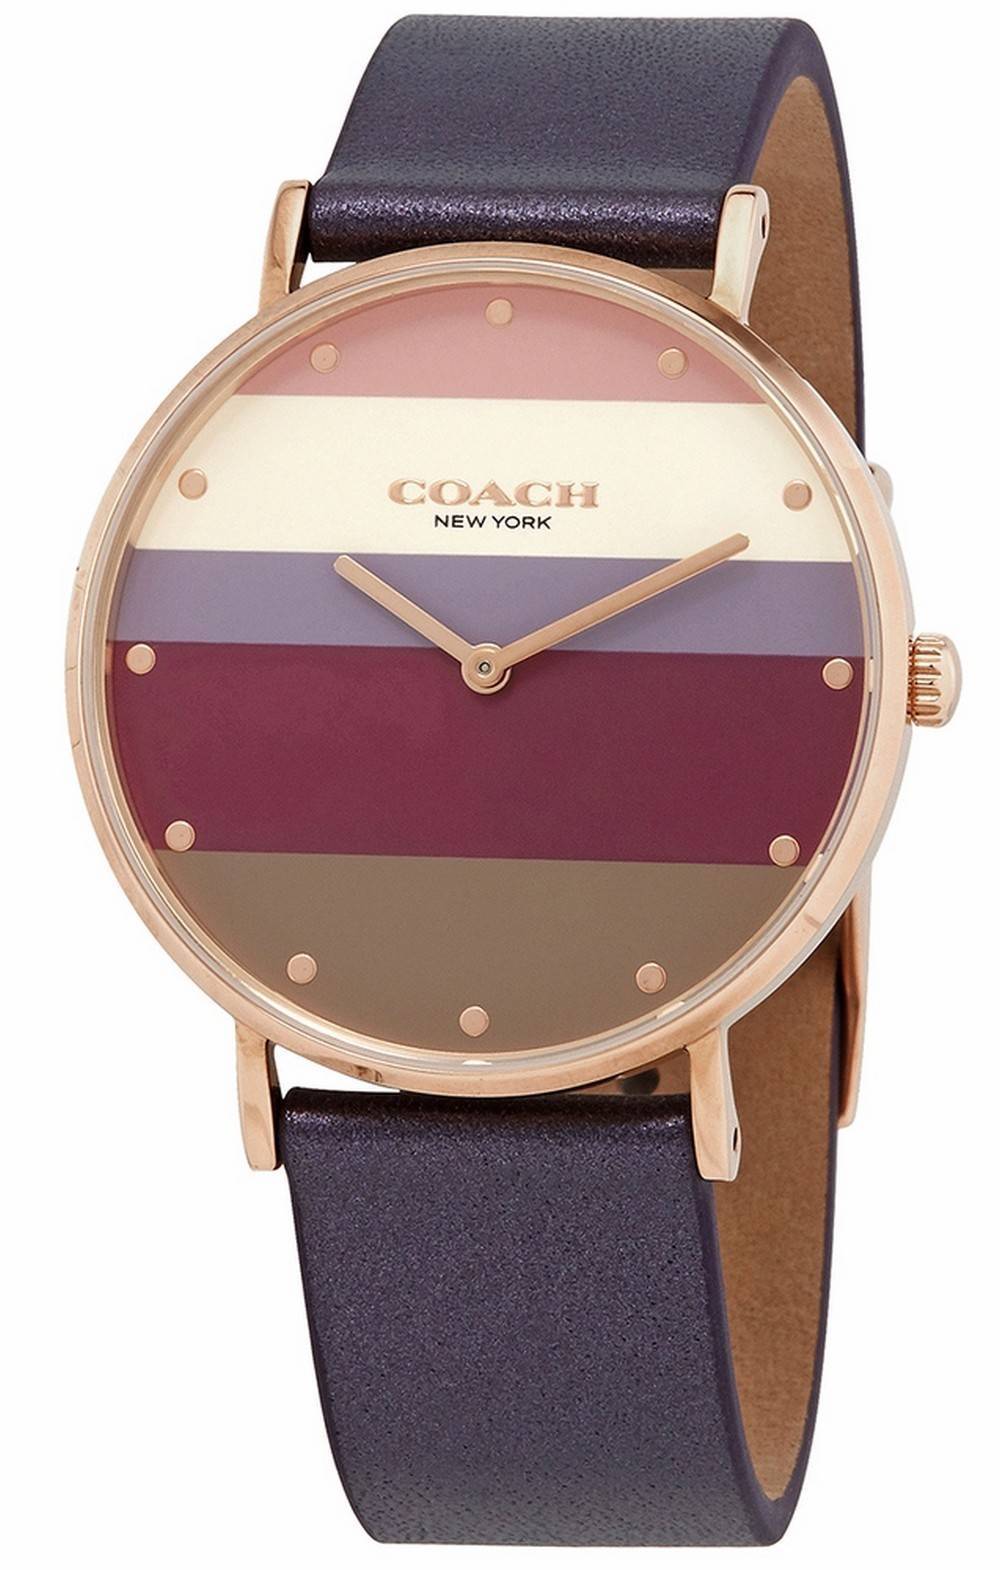 Stylish and Authentic Coach Watch